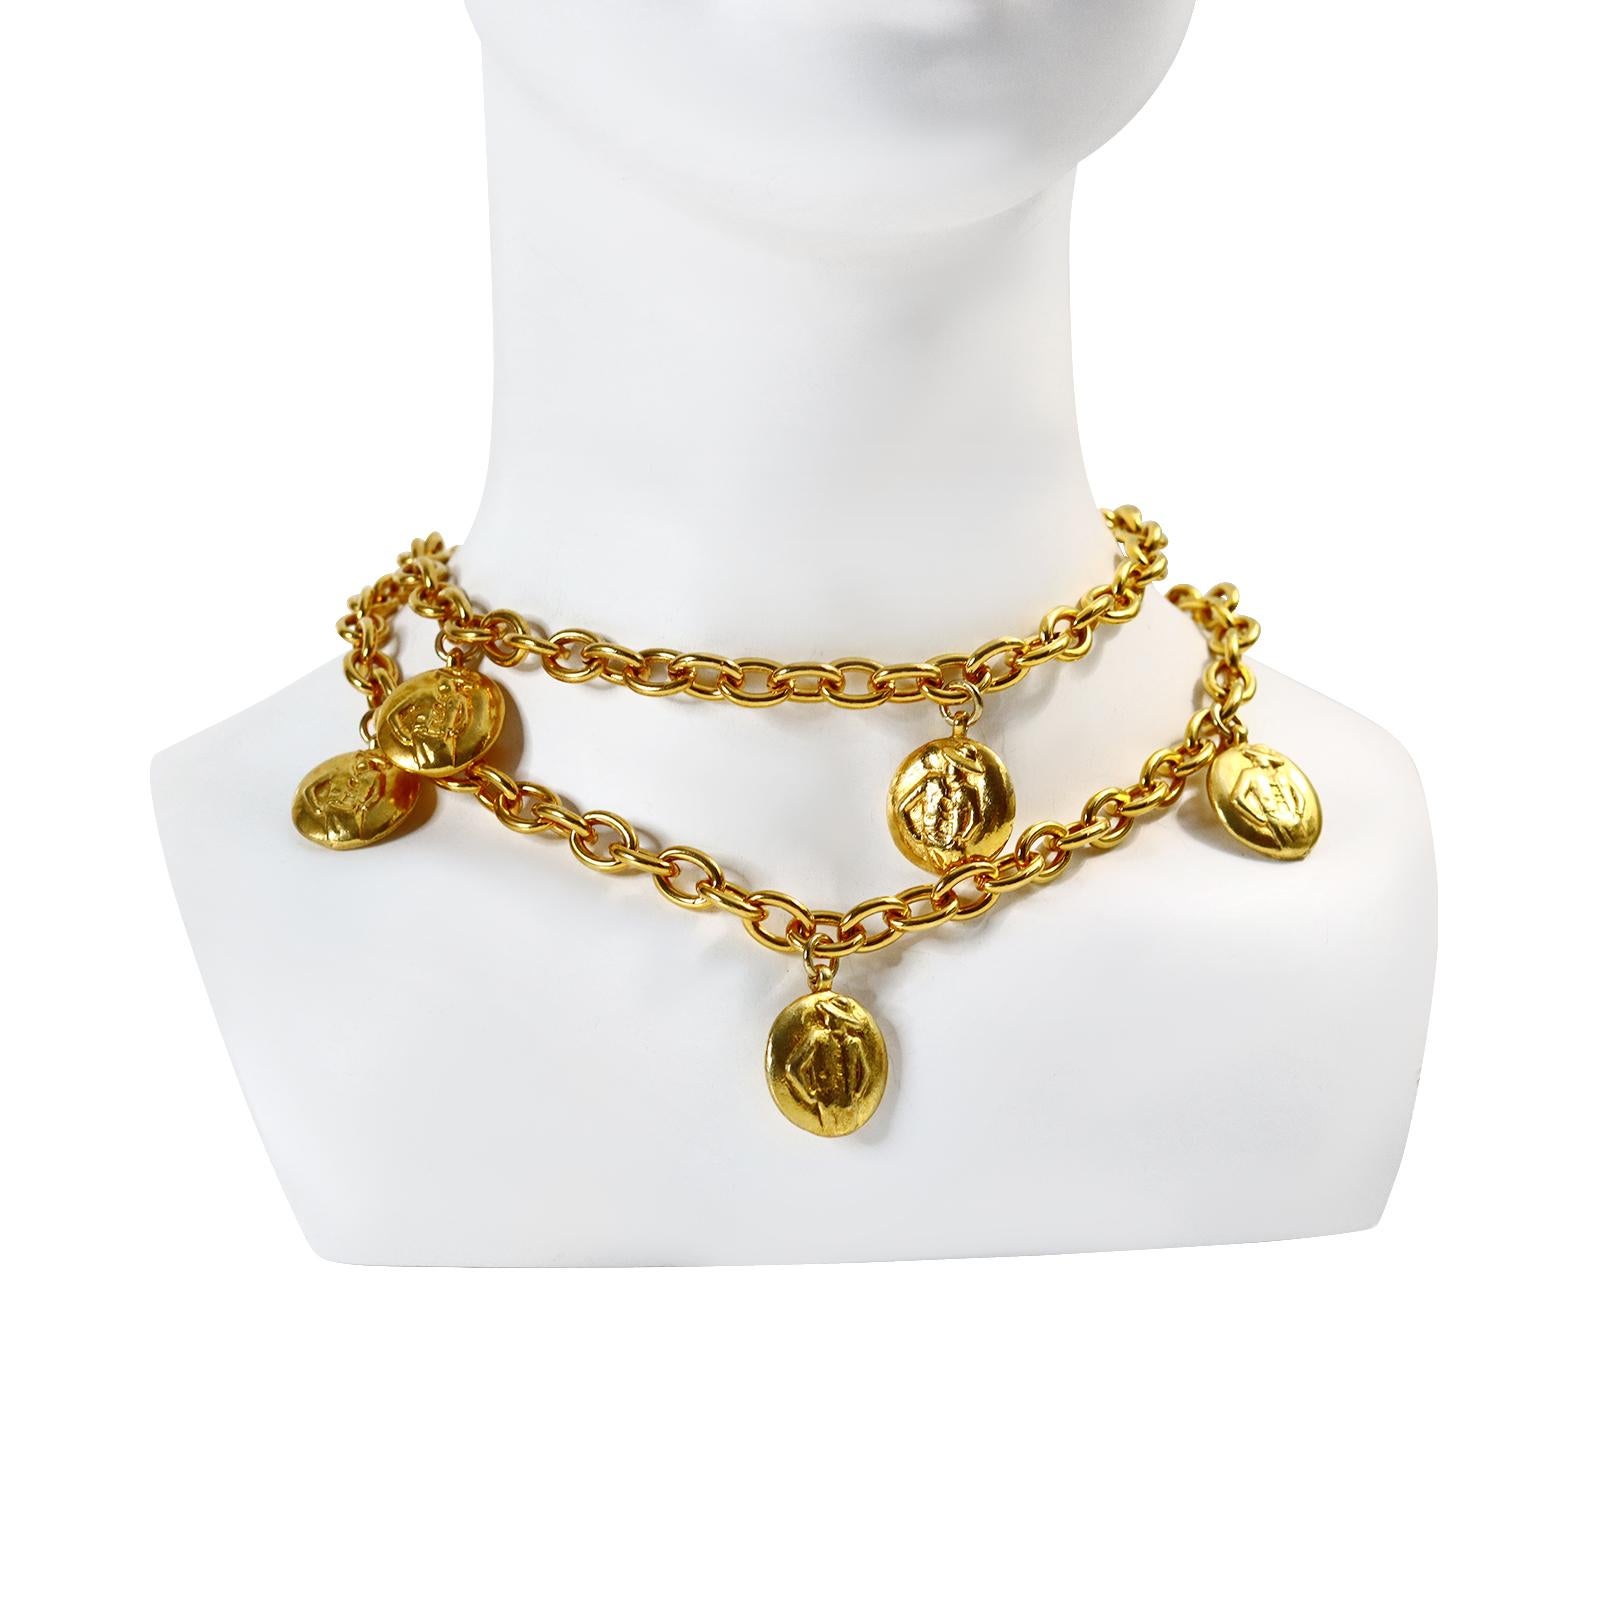 Vintage Chanel Gold Disc Chanel and Coco on Long Necklace Circa 1980s In Good Condition For Sale In New York, NY